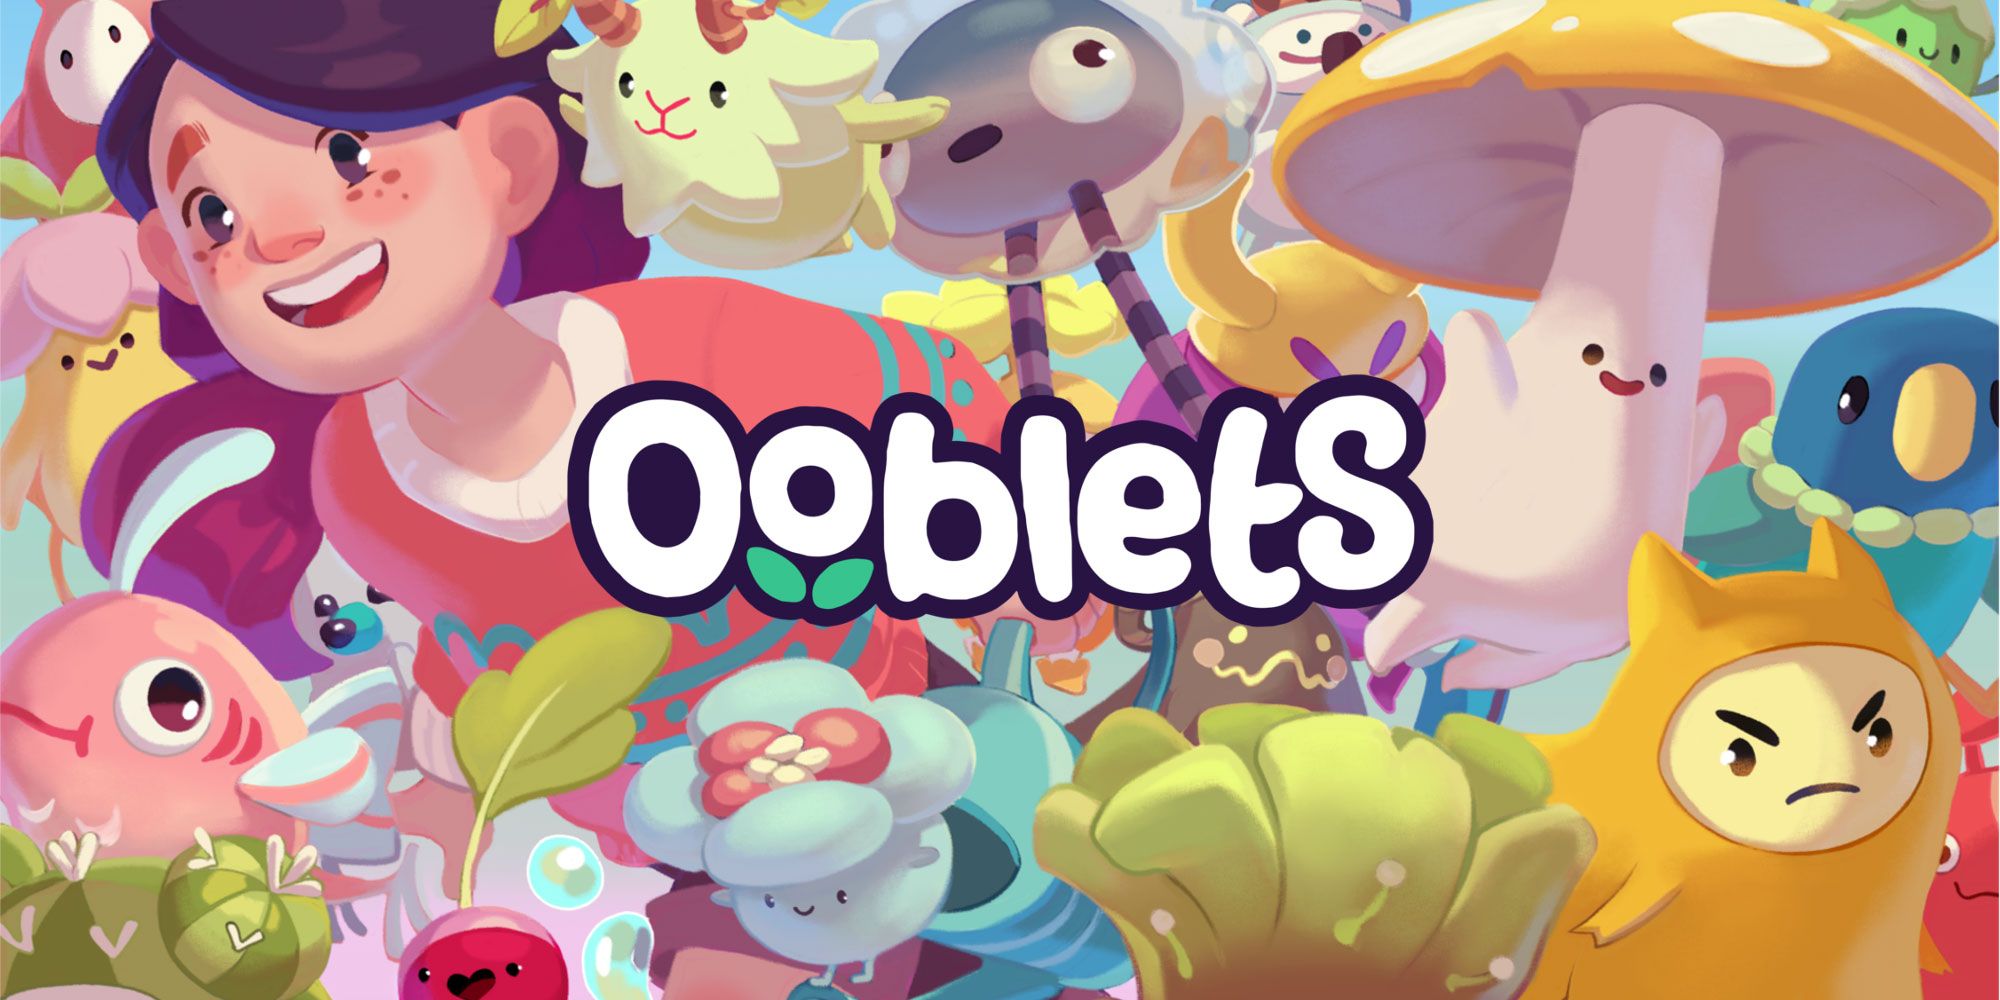 Ooblets Title on a background of Ooblets